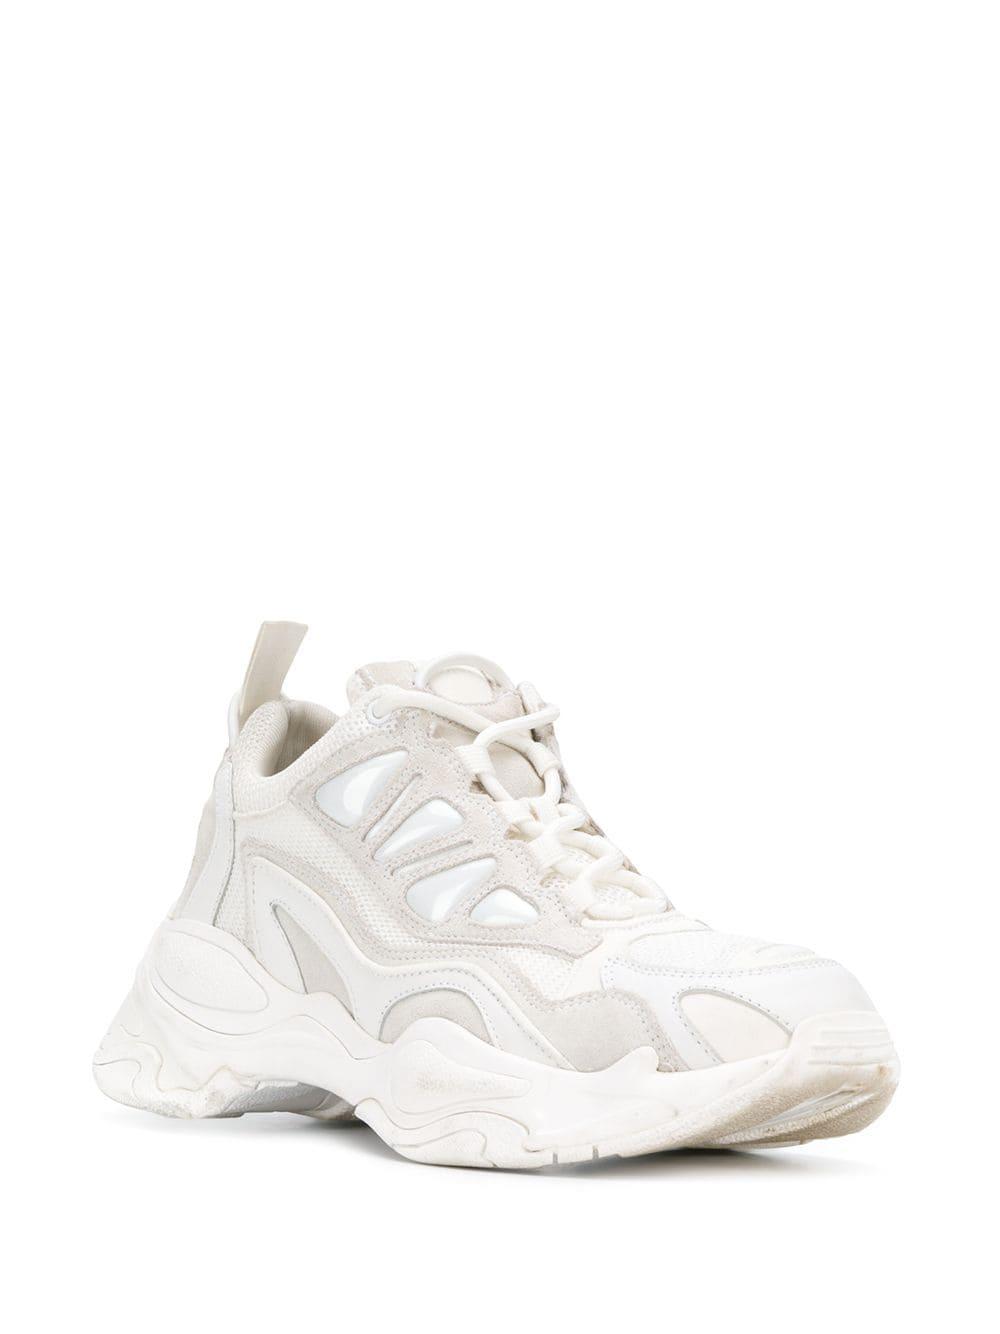 Sandro Leather Astro Sneakers in White | Lyst